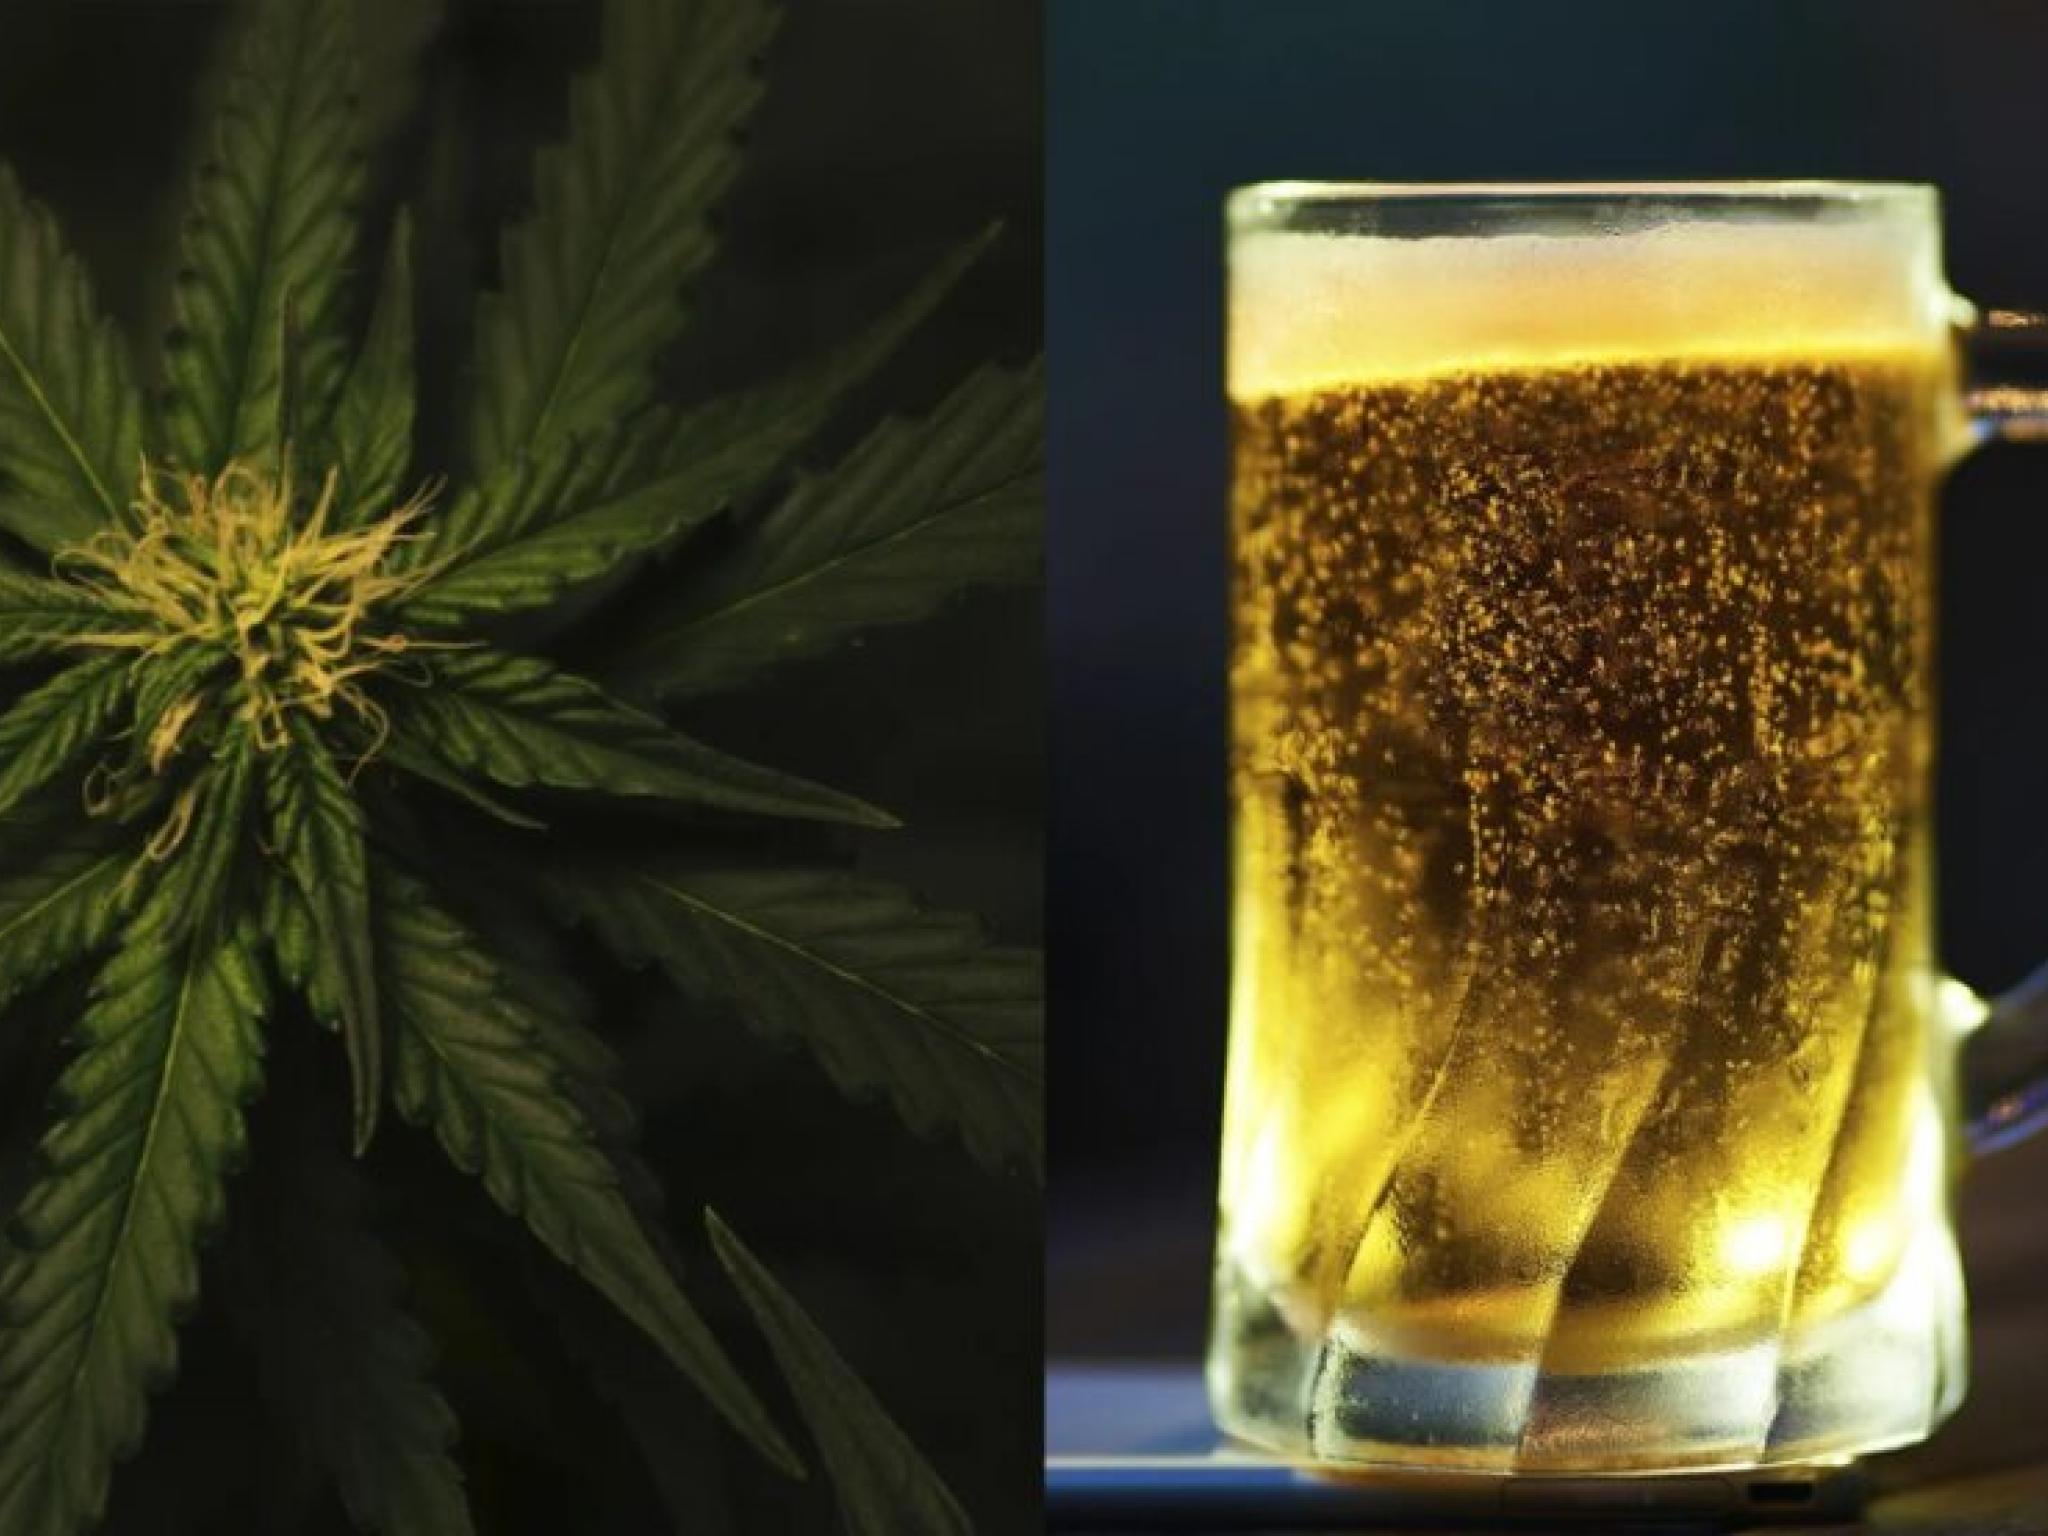  is-cannabis-replacing-beer-canadian-study-links-weed-legalization-to-drop-in-alcohol-sales 